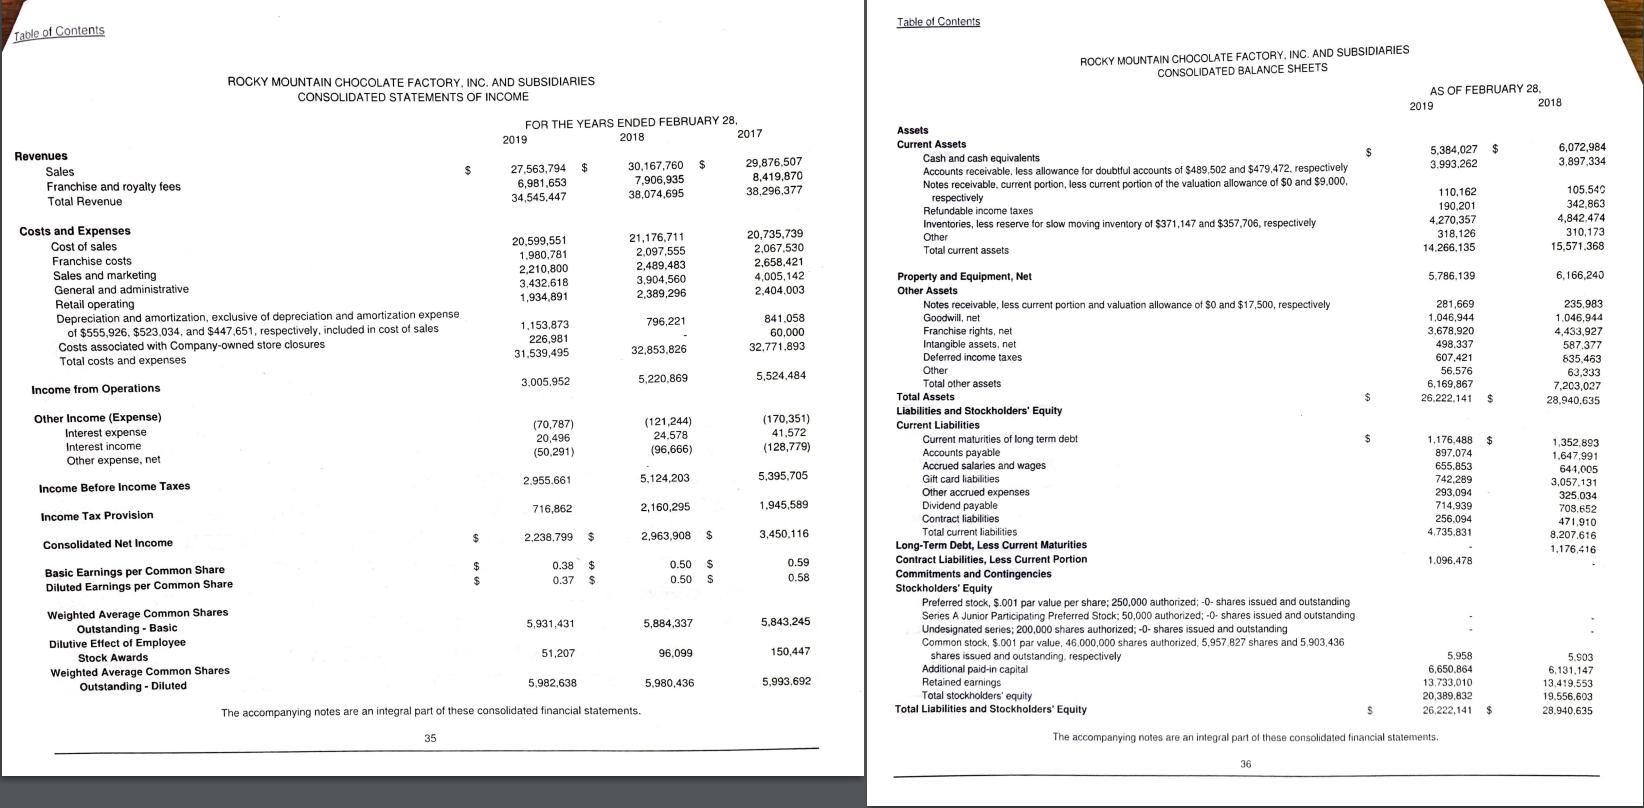 Table of ContentsTable of ContentsROCKY MOUNTAIN CHOCOLATE FACTORY, INC. AND SUBSIDIARIESCONSOLIDATED STATEMENTS OF INCOME